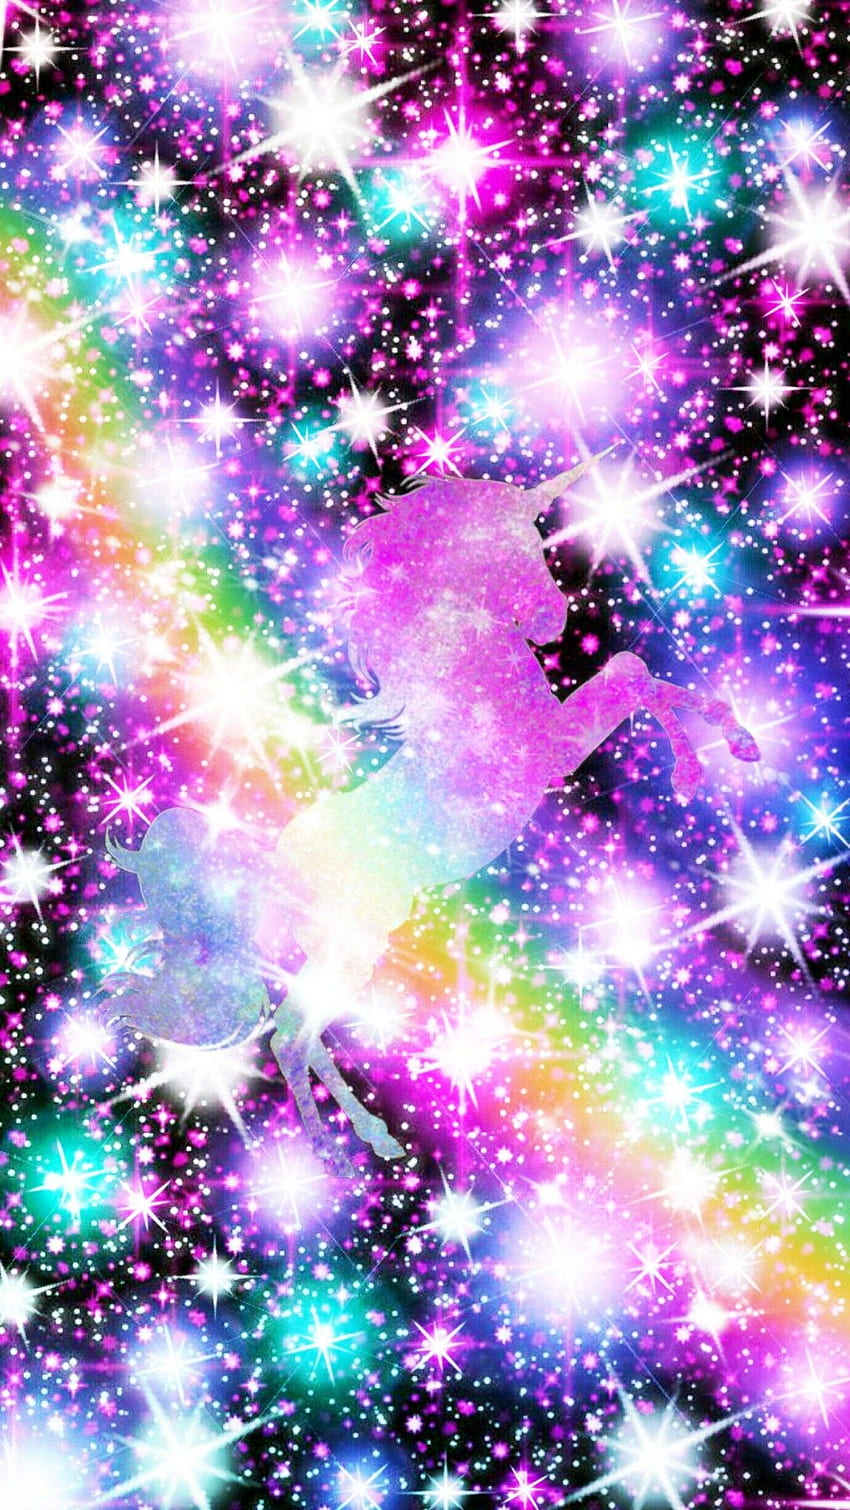 Rainbow Unicorn Background Vector Art Icons and Graphics for Free Download